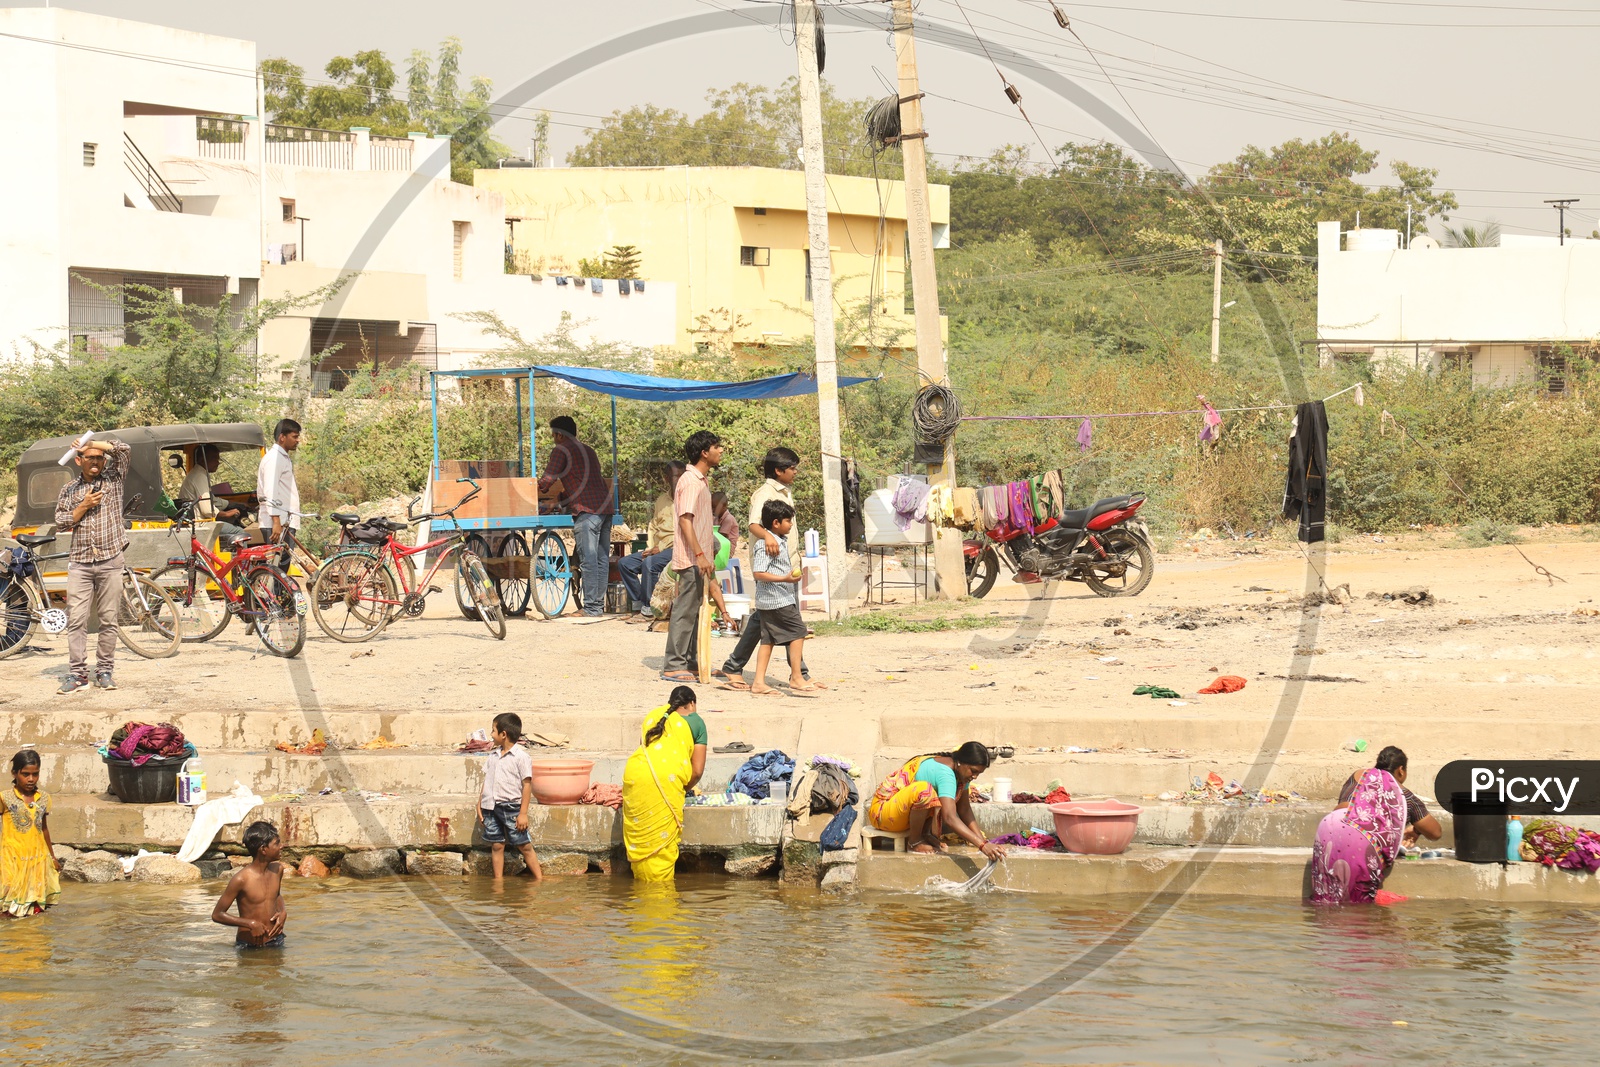 Women washing clothes along the riverside, while kids are playing and men are walking around.